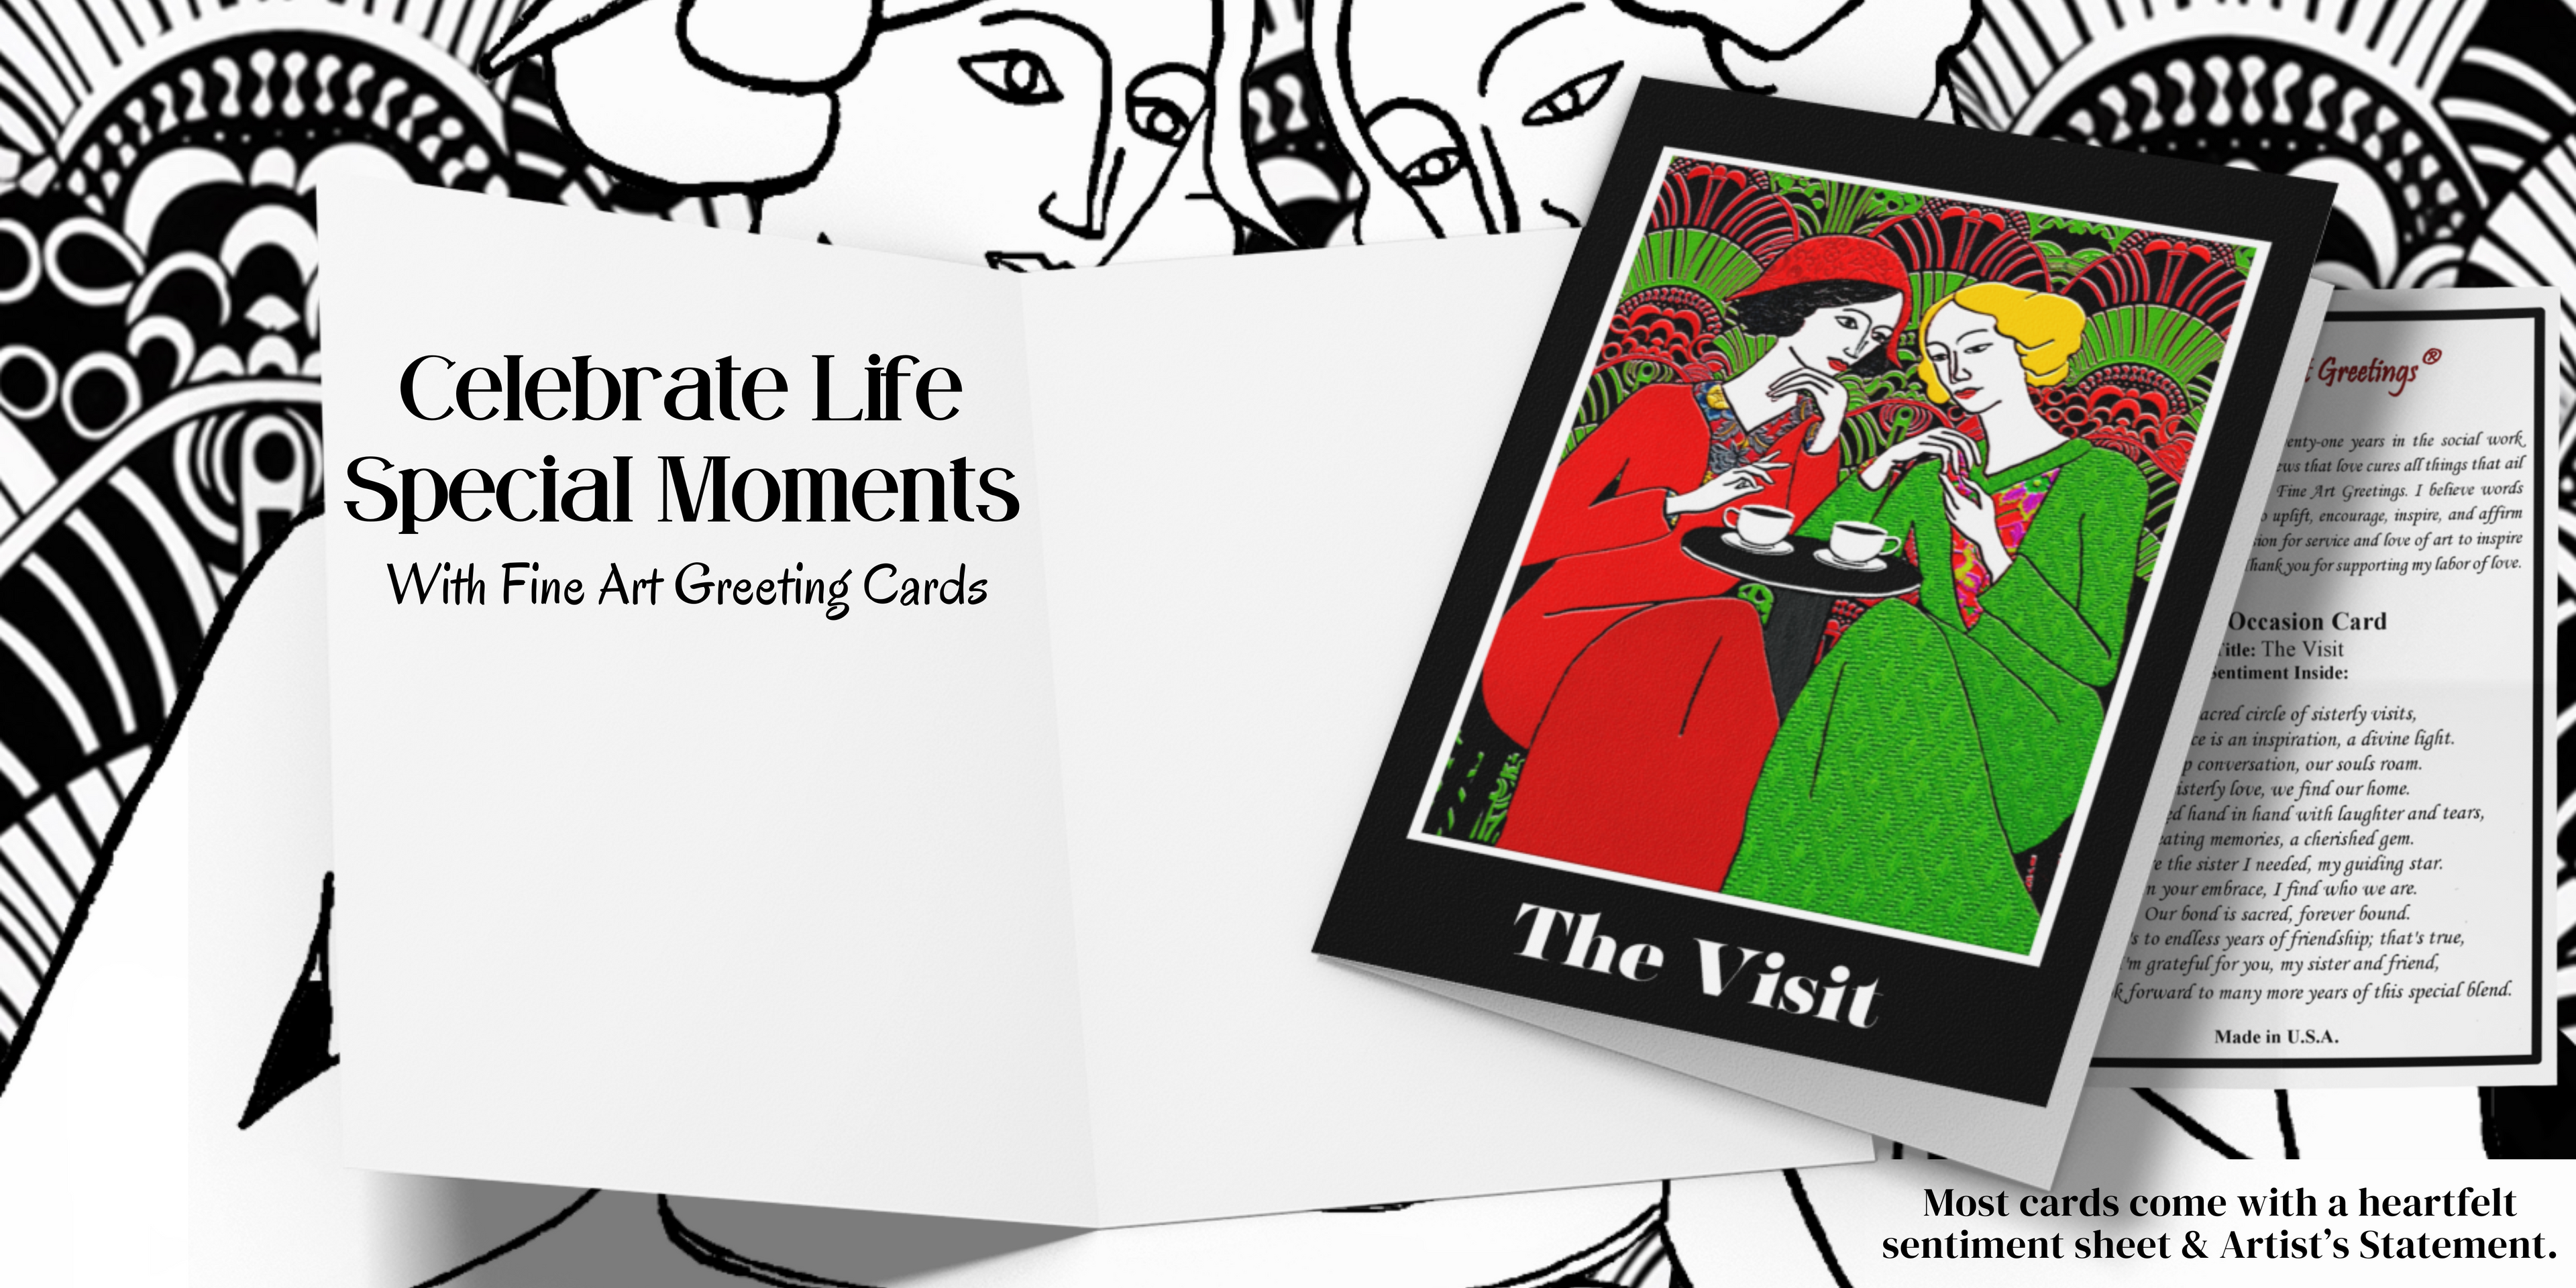 Our fine art greeting card of two women visiting, artist's statement, and poem sheet included.